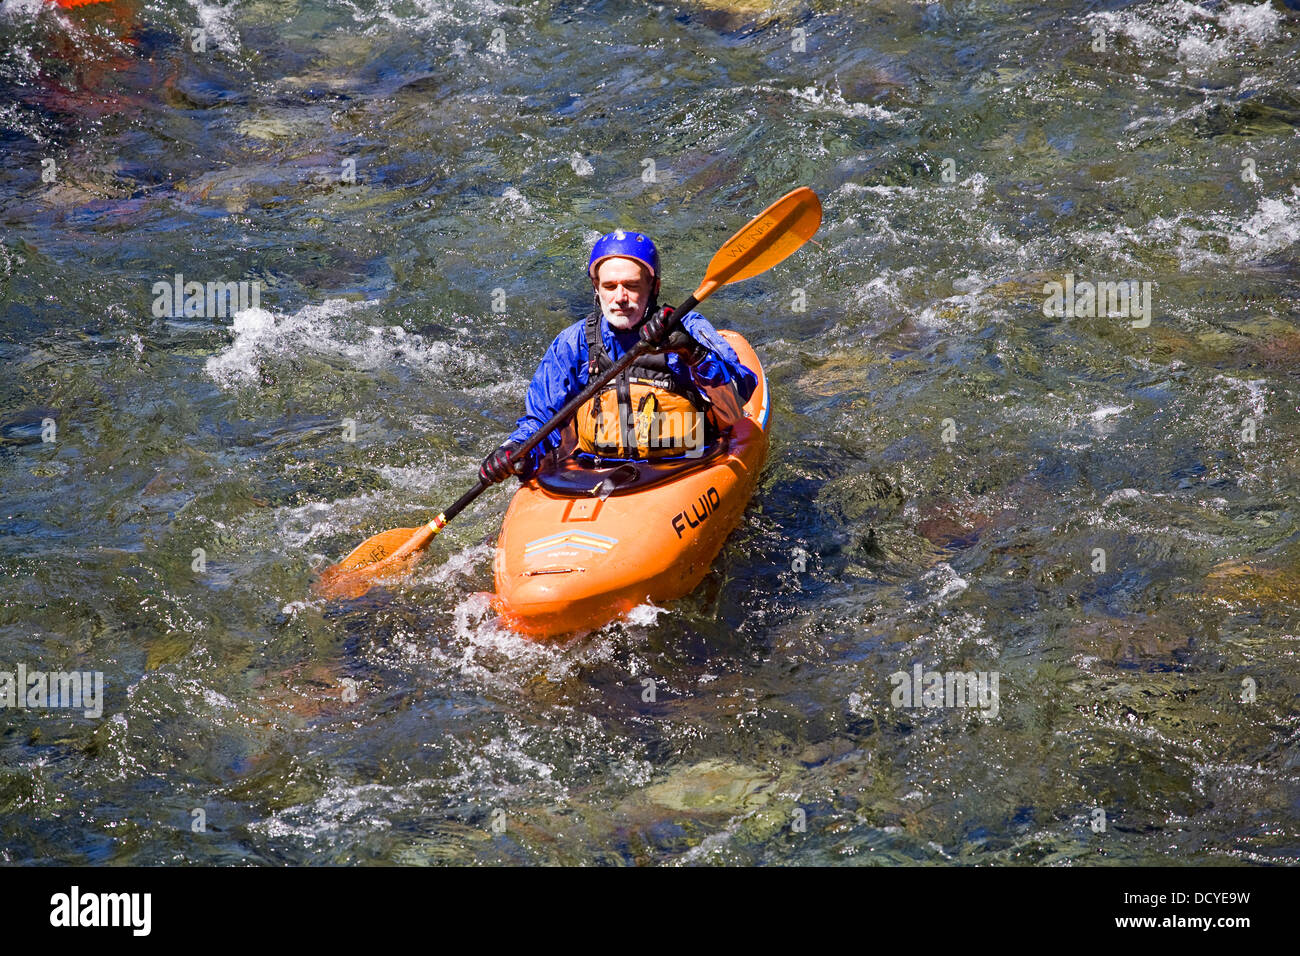 A kayaker on the Upper McKenzie River in the central Oregon Cascade Mountains. Stock Photo